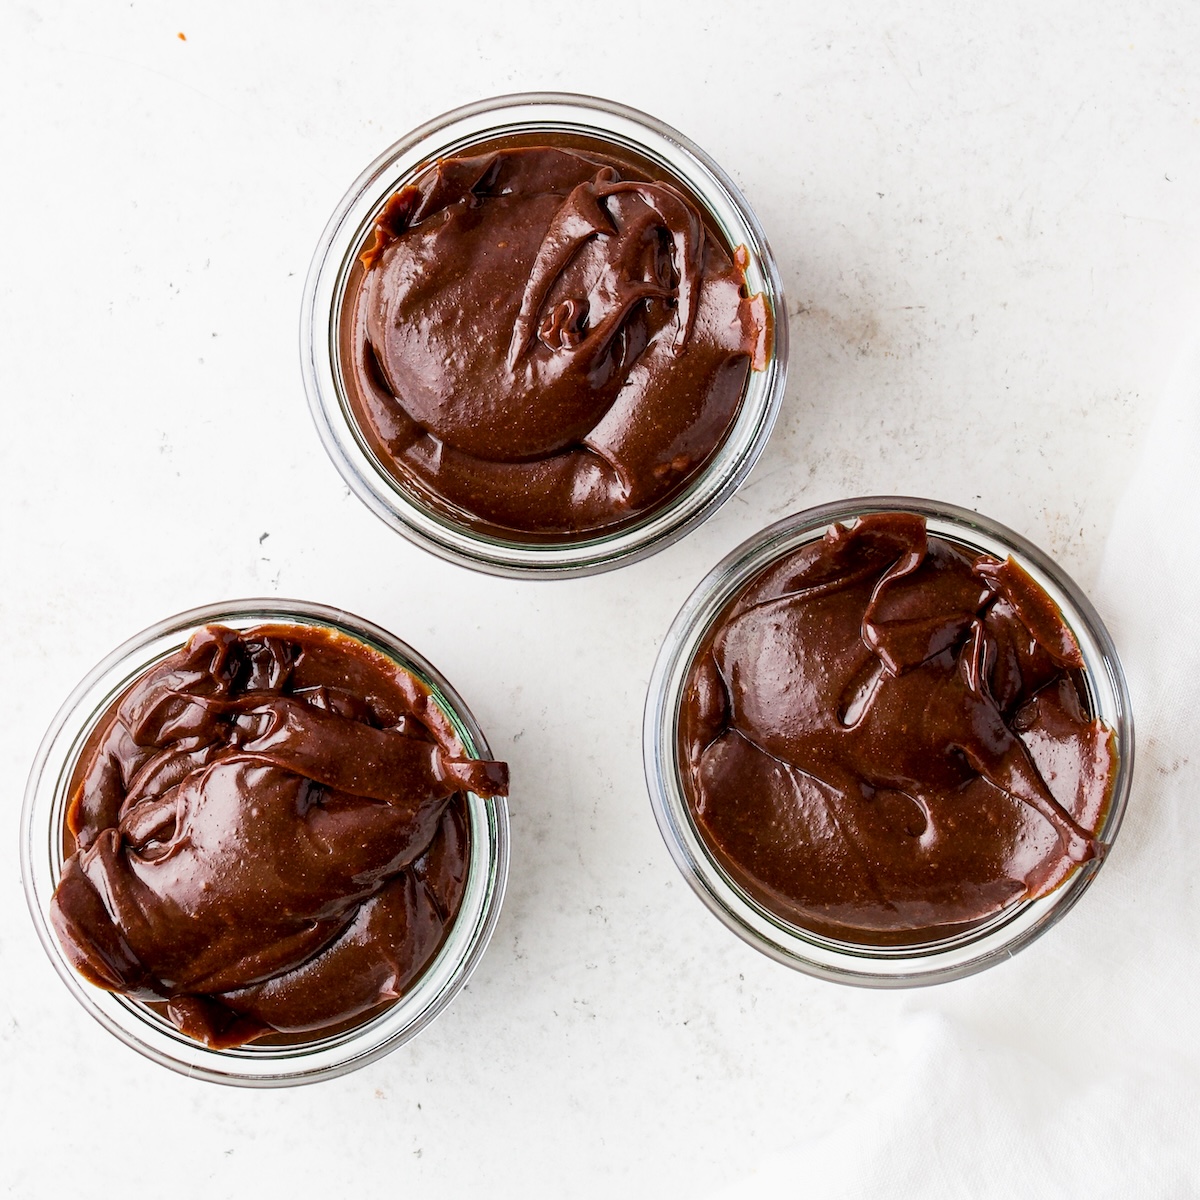 Three glass jars with homemade nutella spread.